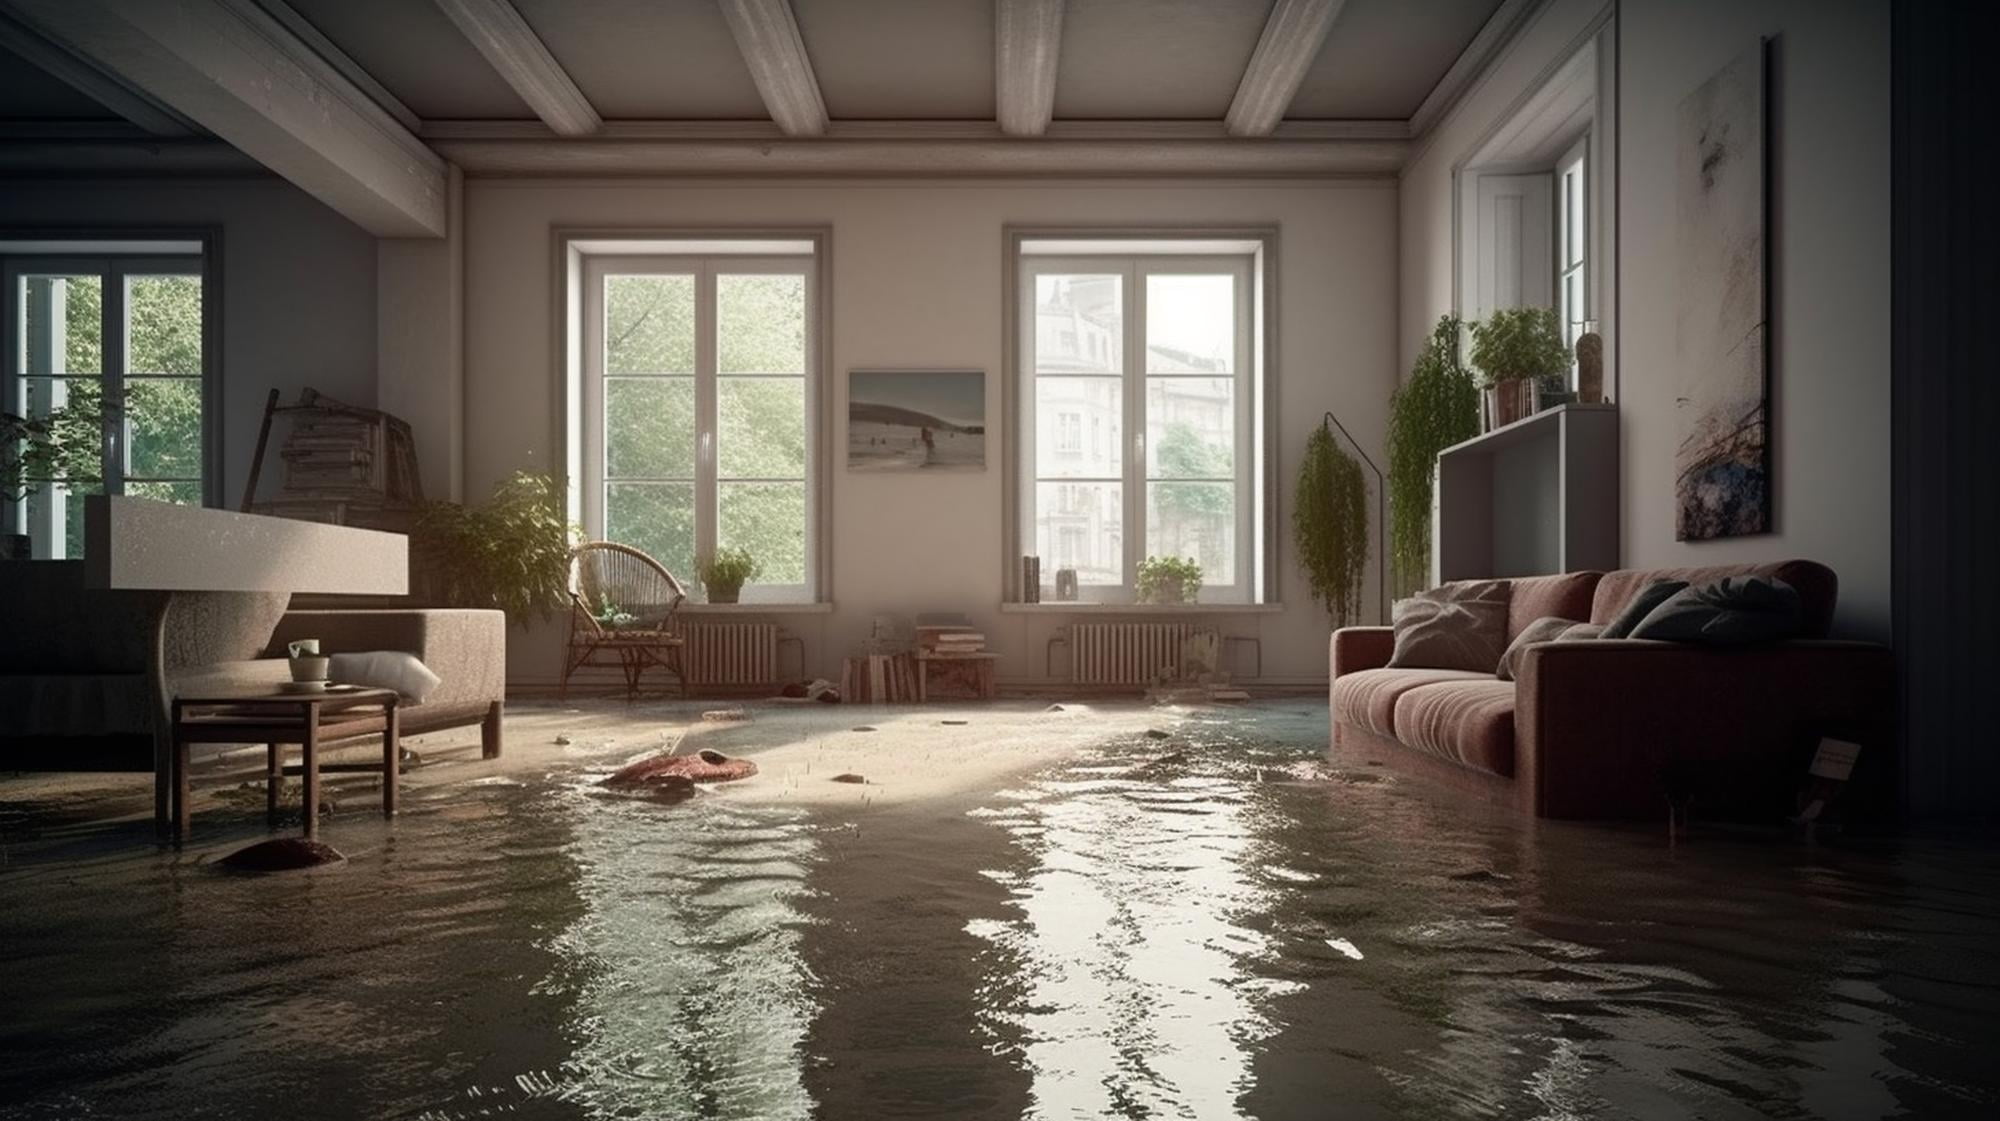 8 Steps to Effectively Clean Up After a Home Flood